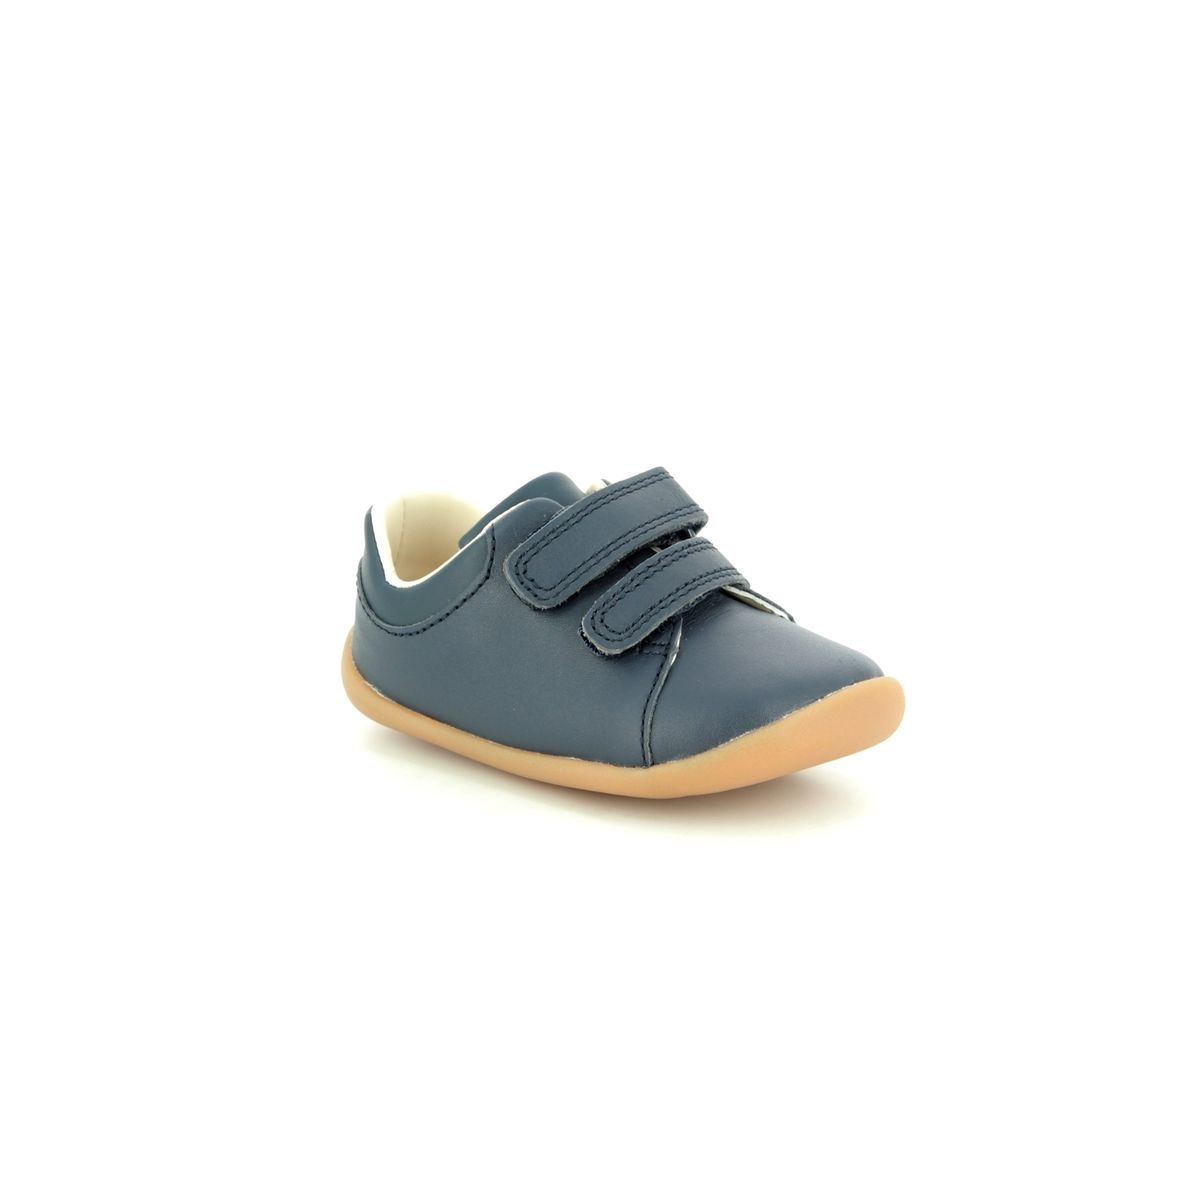 Clarks Roamer Craft T Navy Leather Kids Boys First Shoes 4228-68H in a Plain Leather in Size 2.5